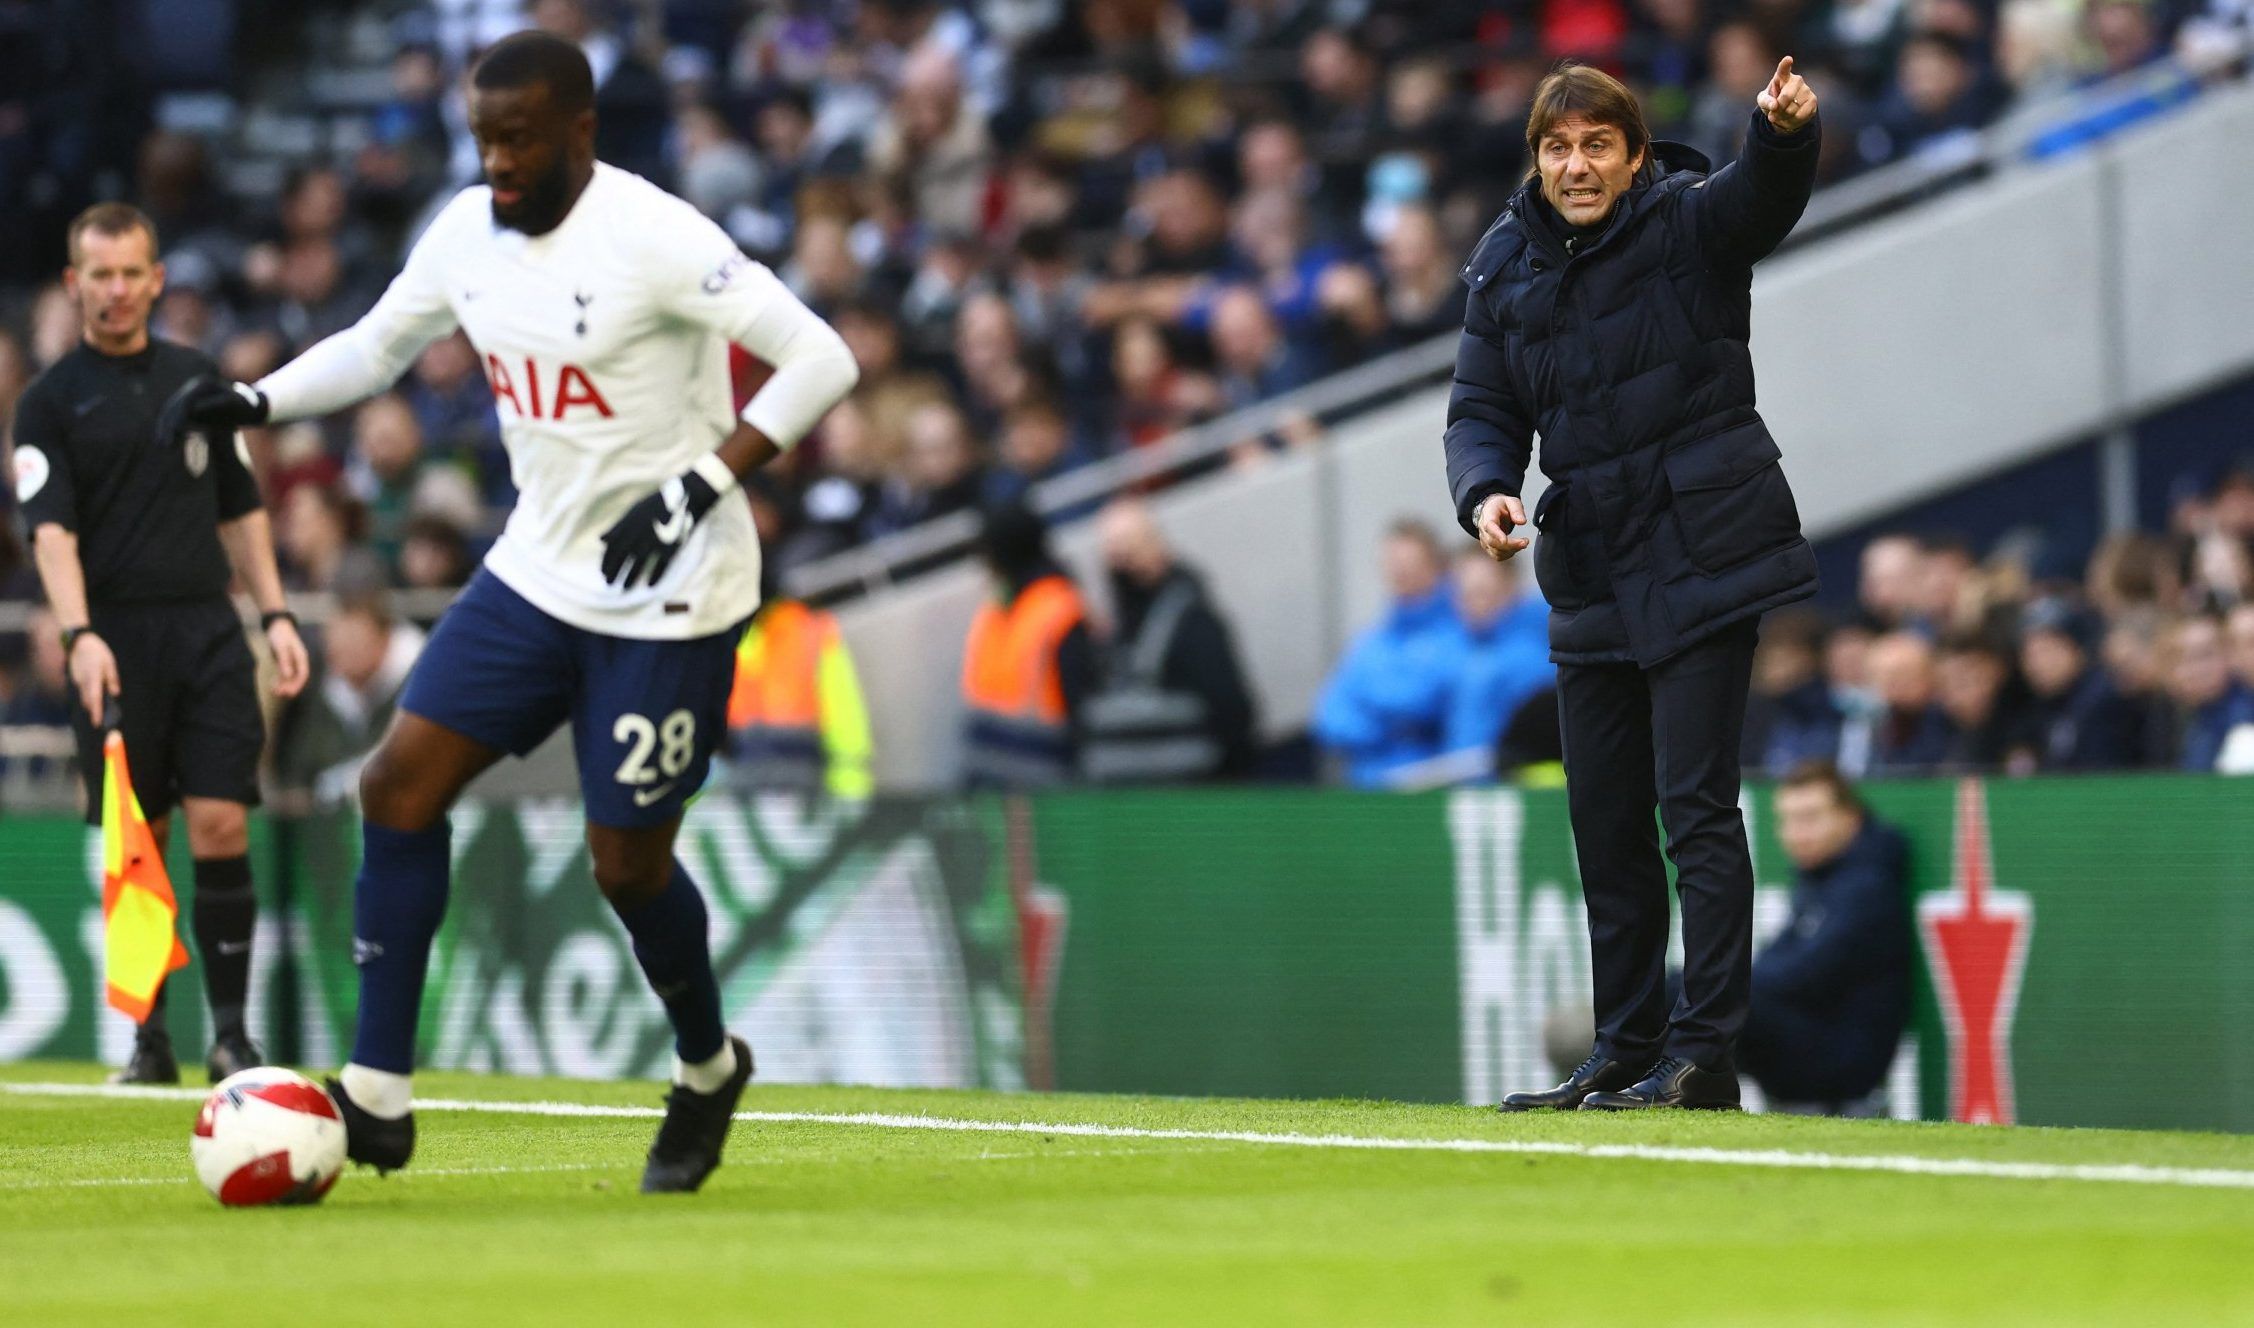 Spurs boss Antonio Conte on the sidelines against Morecambe in the FA Cup